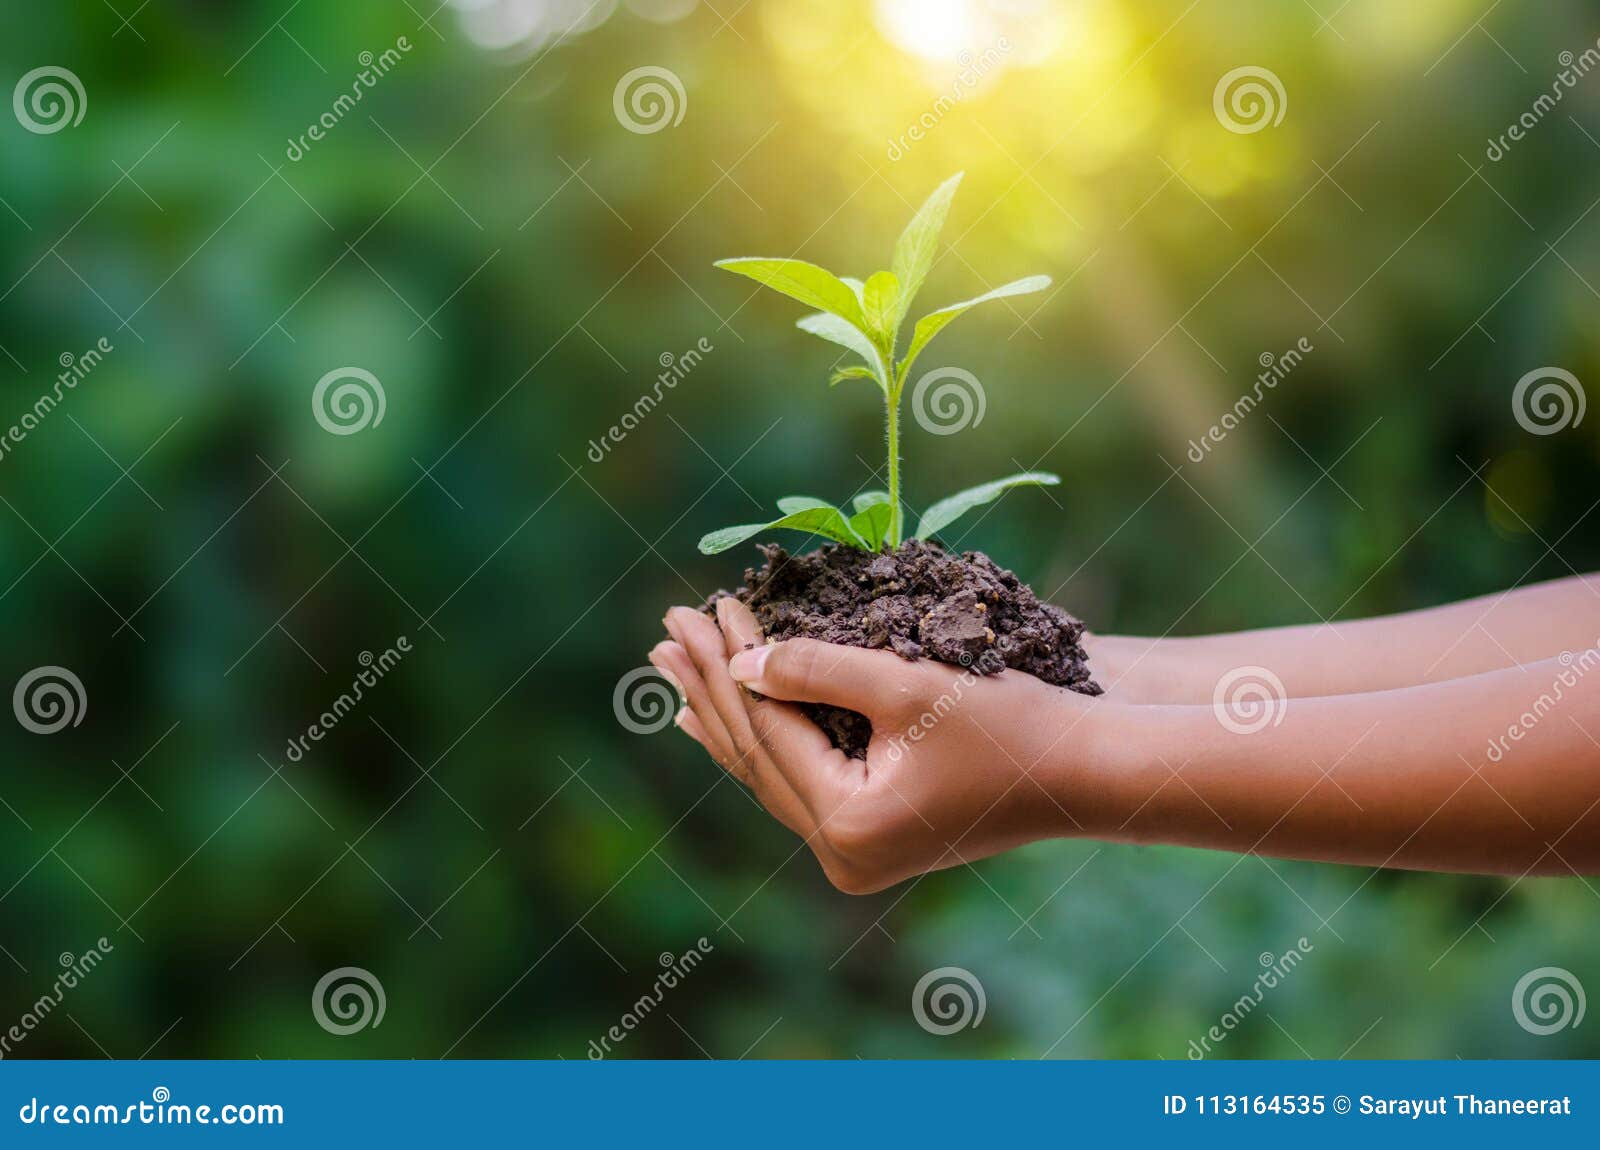 in the hands of trees growing seedlings. bokeh green background female hand holding tree on nature field grass forest conservation